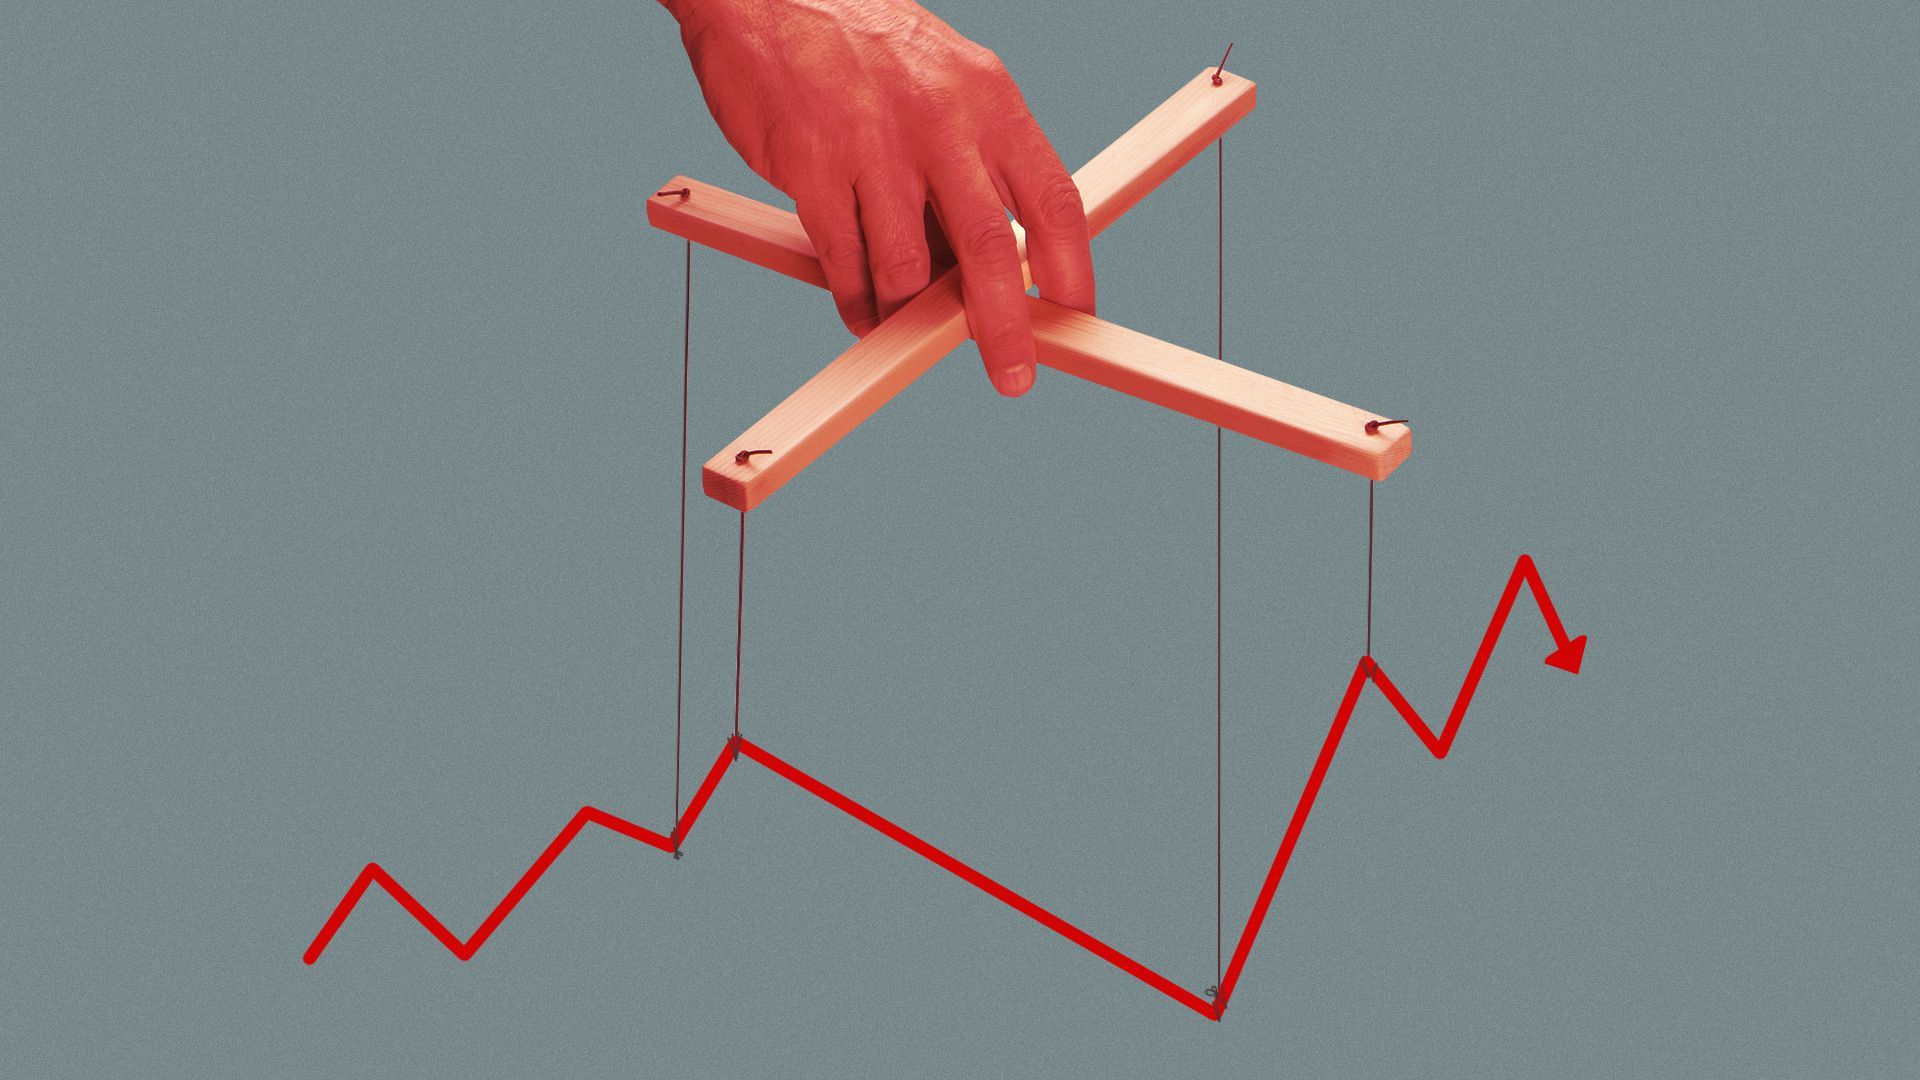 Illustration of a hand operating a marionette attached to a stock trend line.